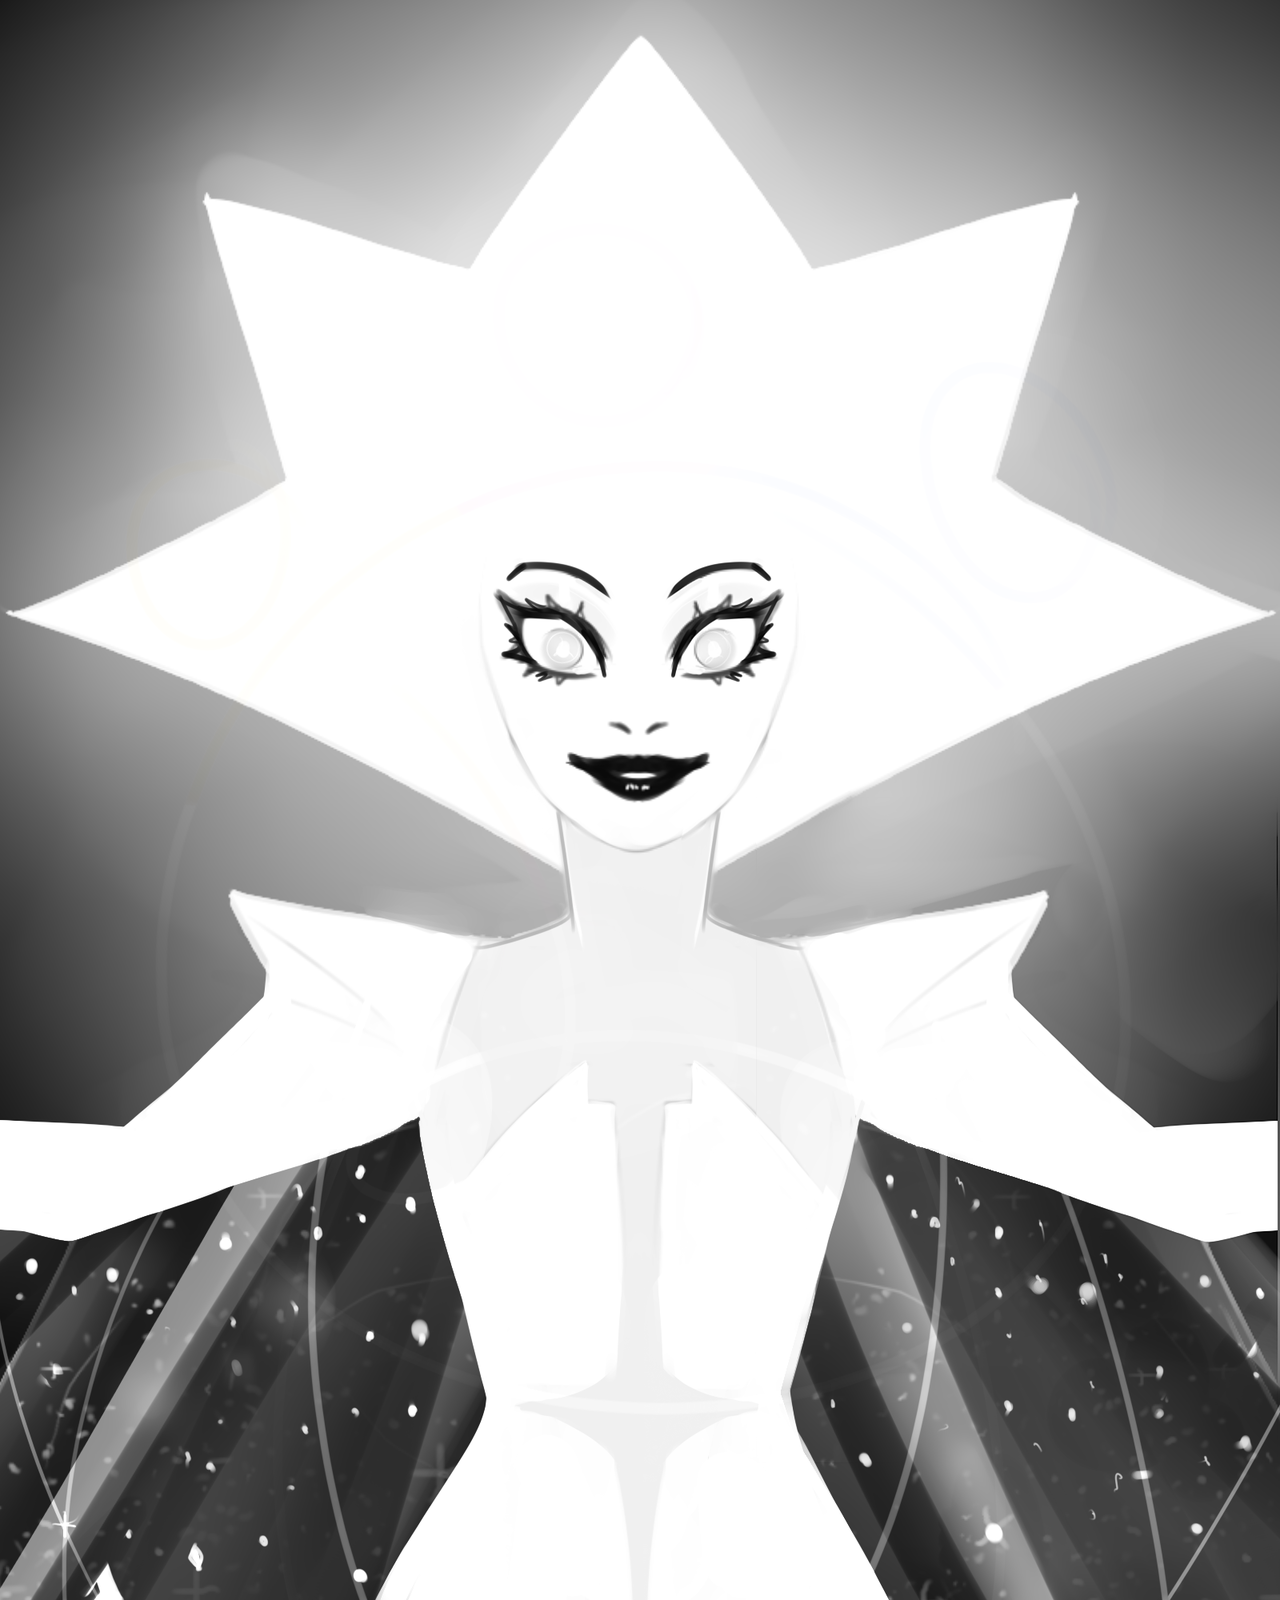 White diamond was nothing like I’ve imagined and she’s creeping me out in all the right ways~ I wasn’t sure which face or pose to do so I did all, with the last making her body the same as the ships...